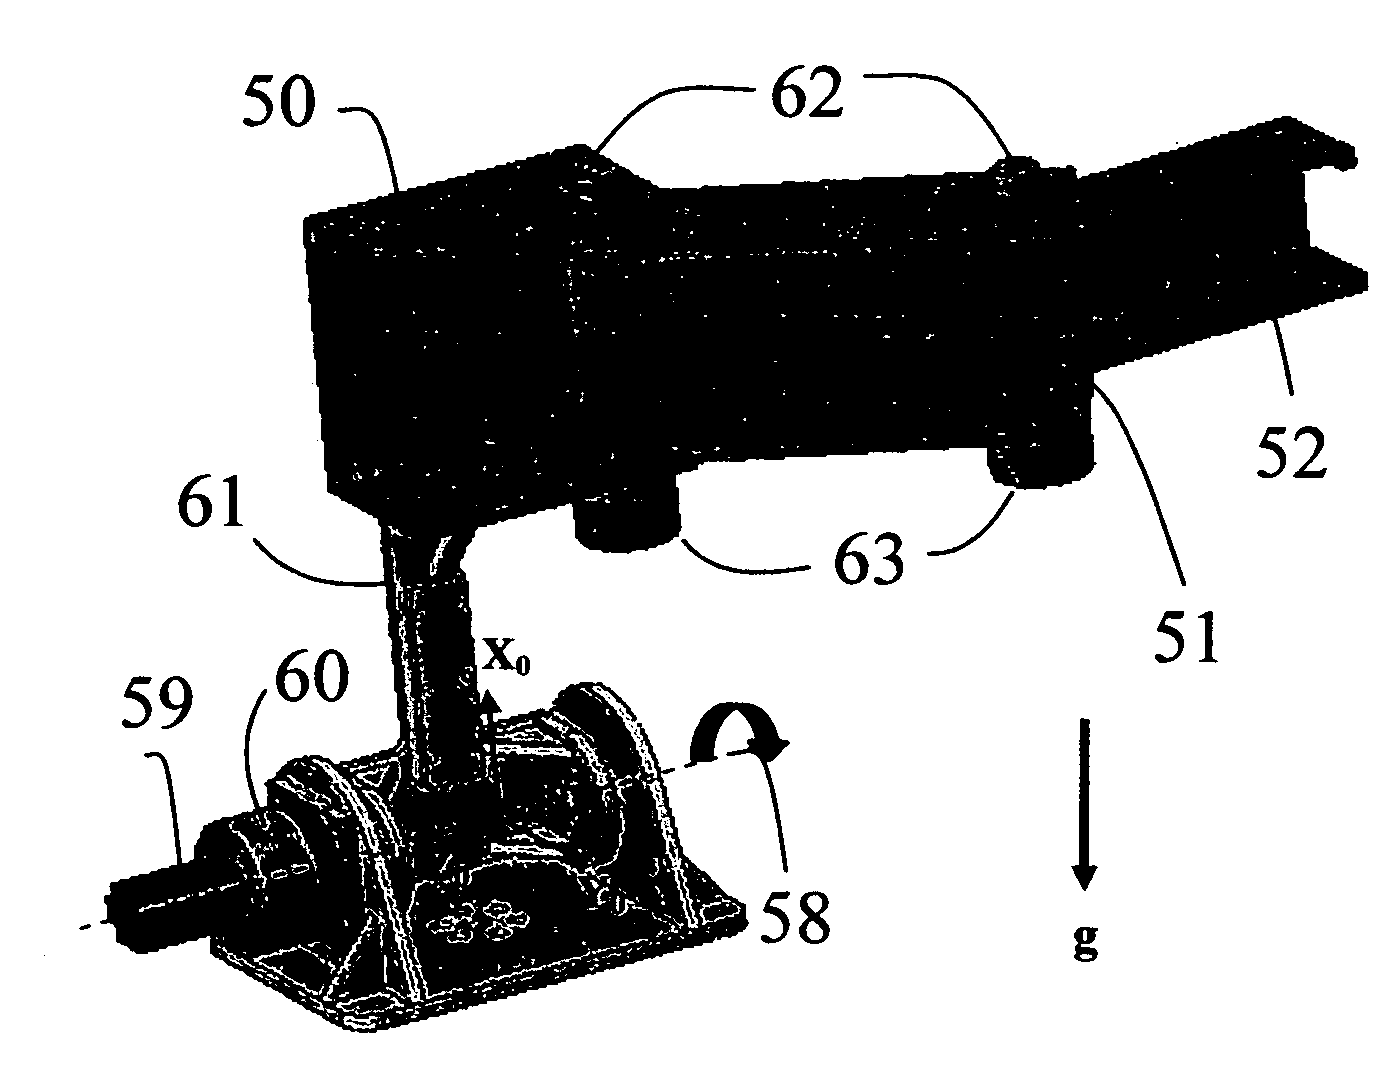 Gravity driven underactuated robot arm for assembly operations inside an aircraft wing box